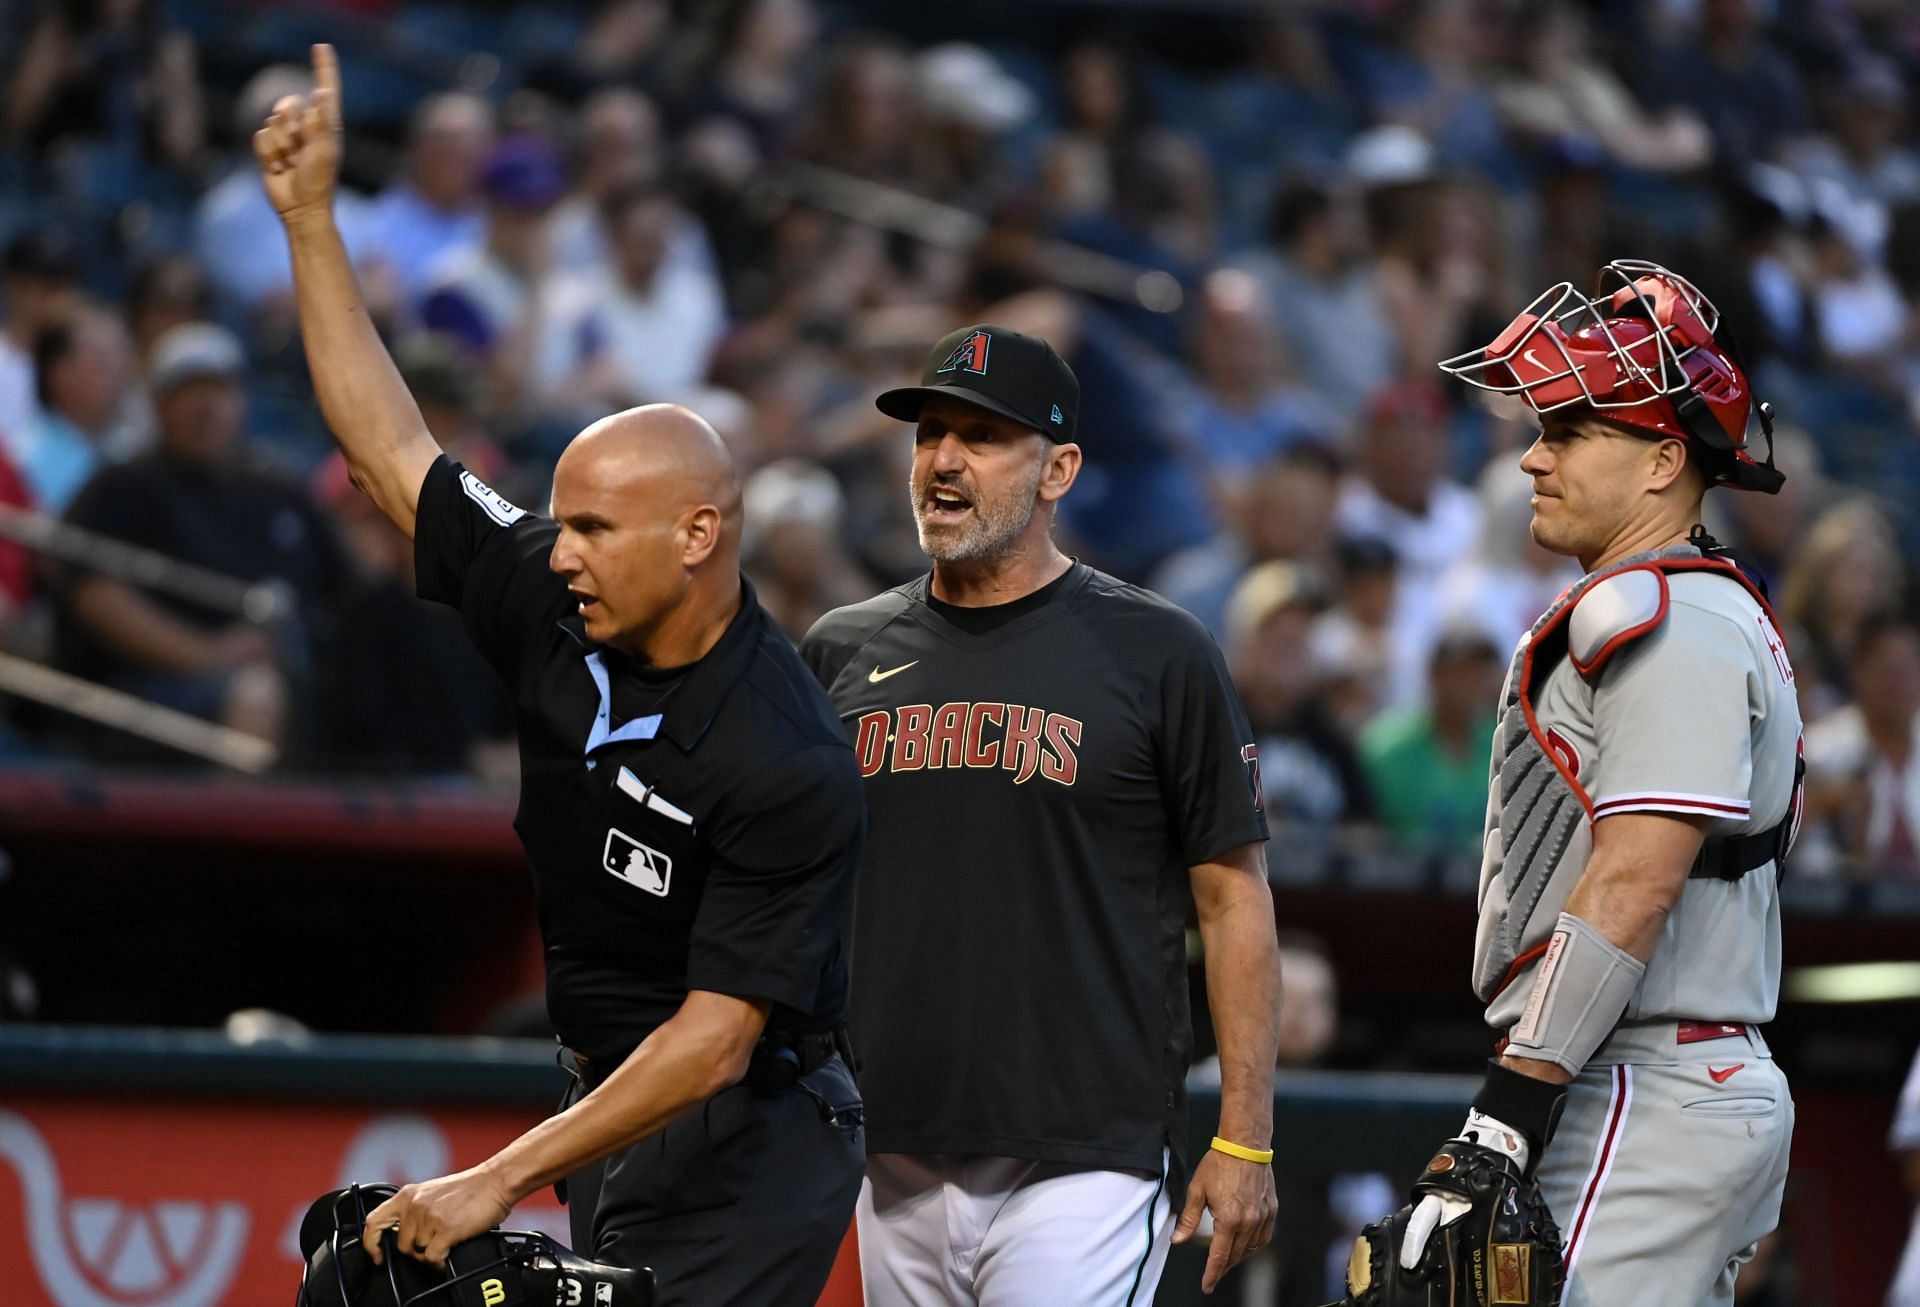 J.T. Realmuto and Torey Lovullo screamed at each other